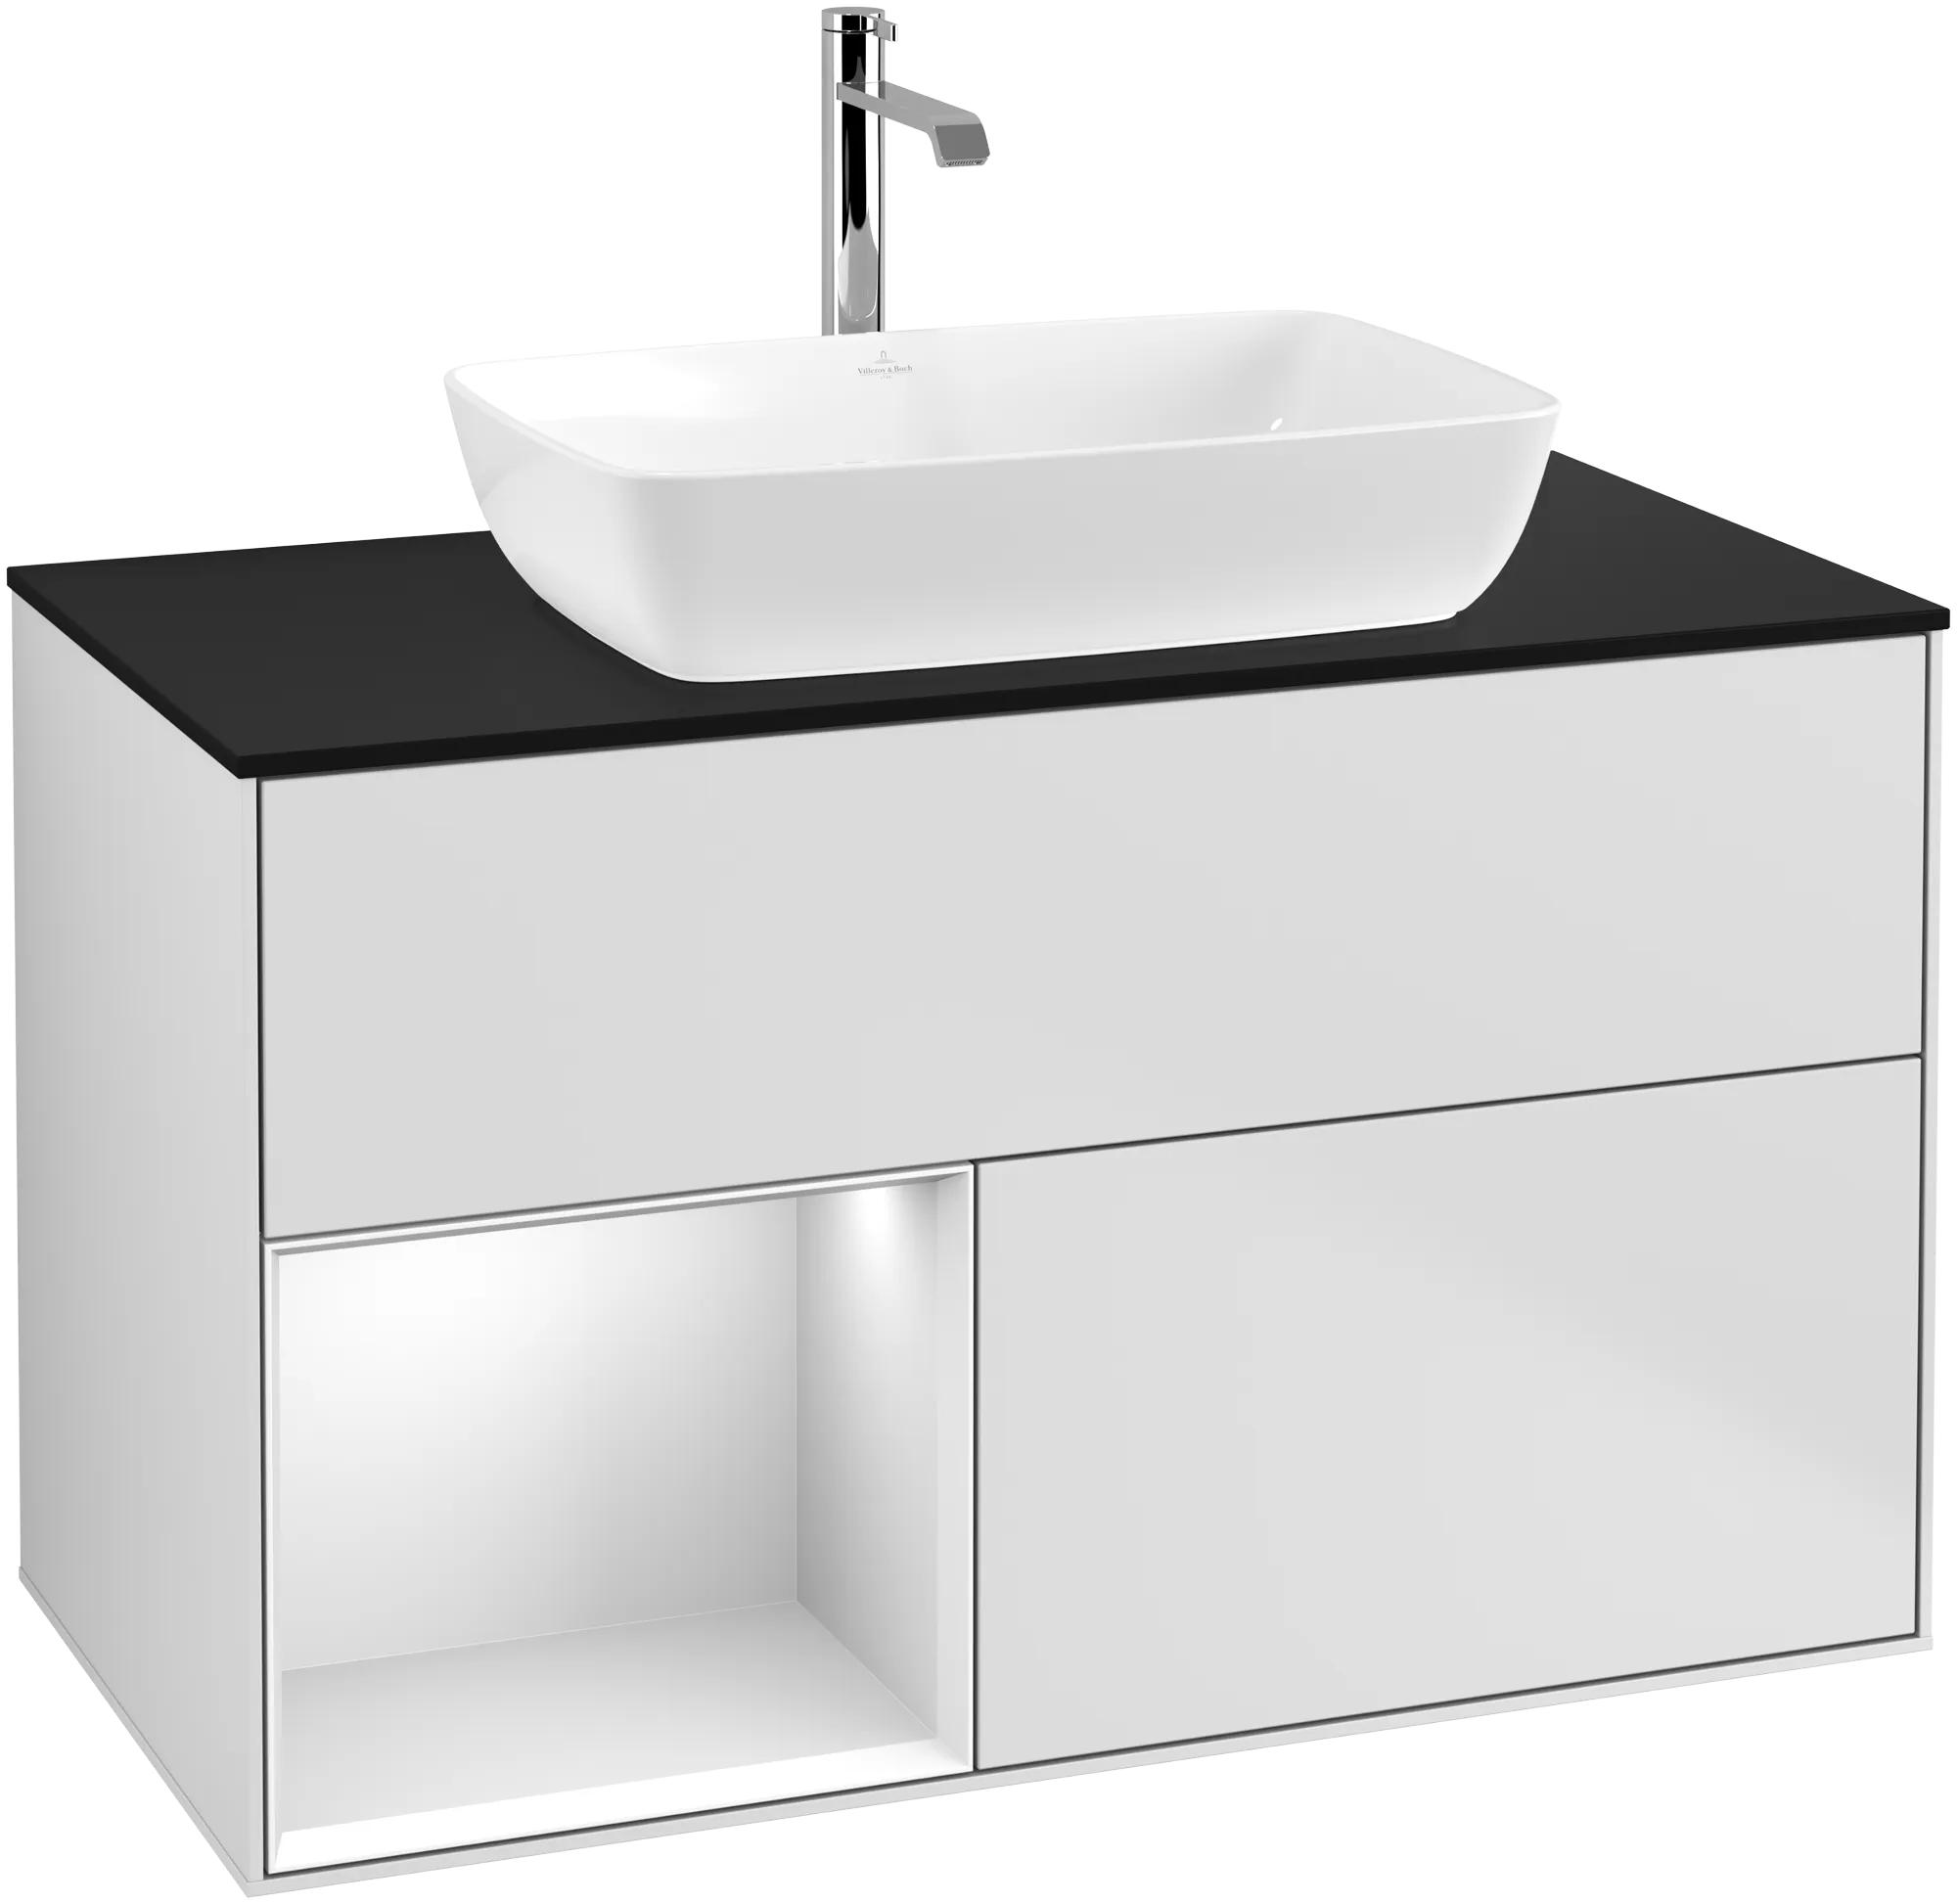 Picture of VILLEROY BOCH Finion Vanity unit, with lighting, 2 pull-out compartments, 1000 x 603 x 501 mm, White Matt Lacquer / White Matt Lacquer / Glass Black Matt #G772MTMT